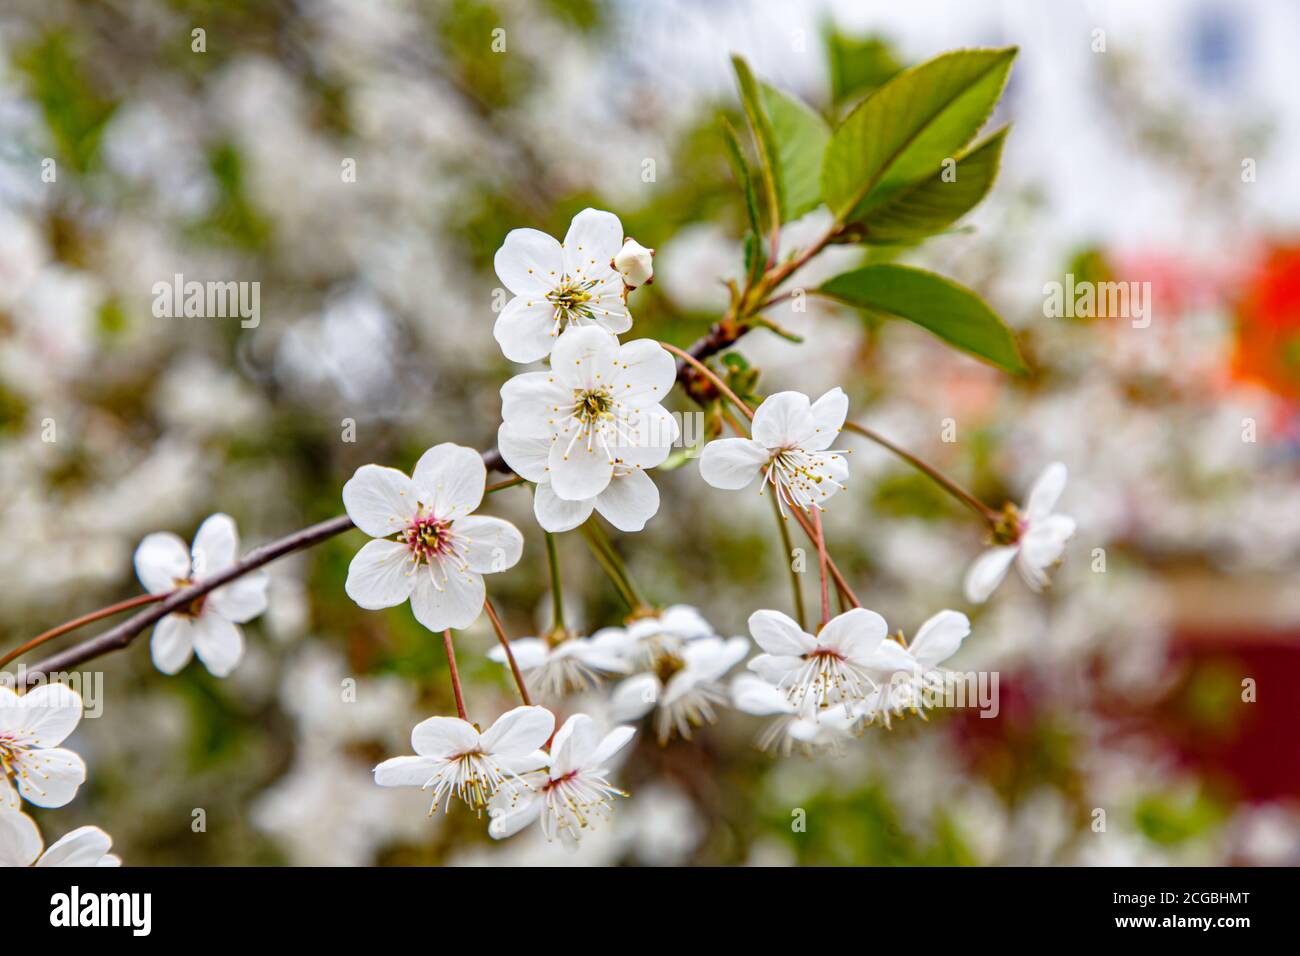 Blooming Apple or cherry. White flowers on tree branches. Spring. Stock Photo